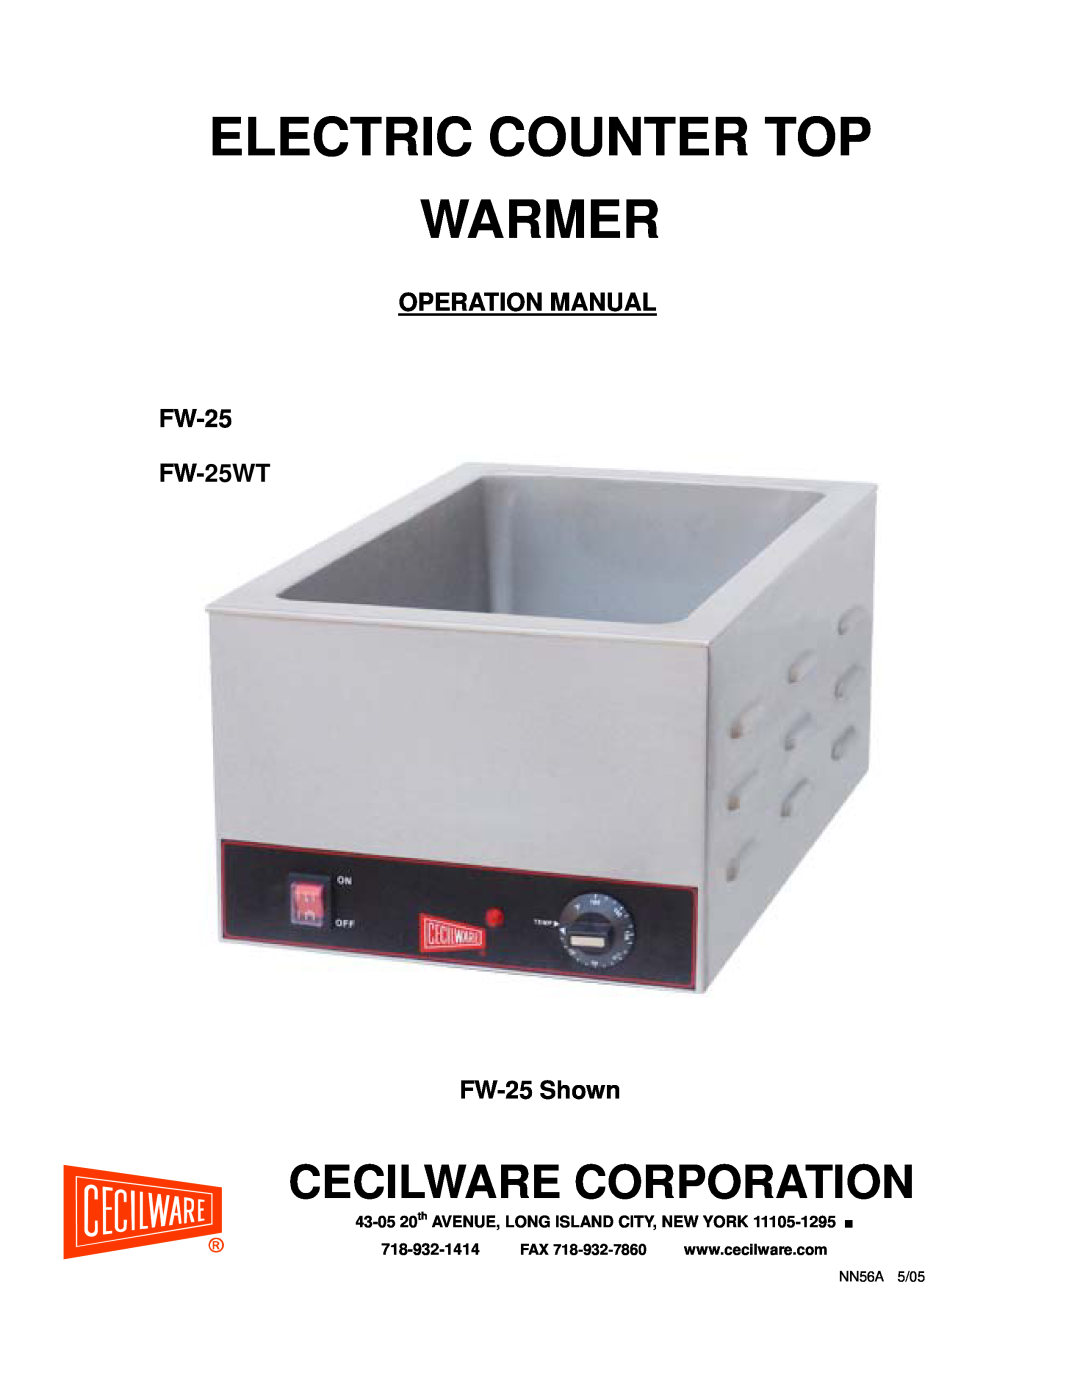 Cecilware FW-25WT operation manual Cecilware Corporation, Electric Counter Top Warmer, NN56A 5/05 